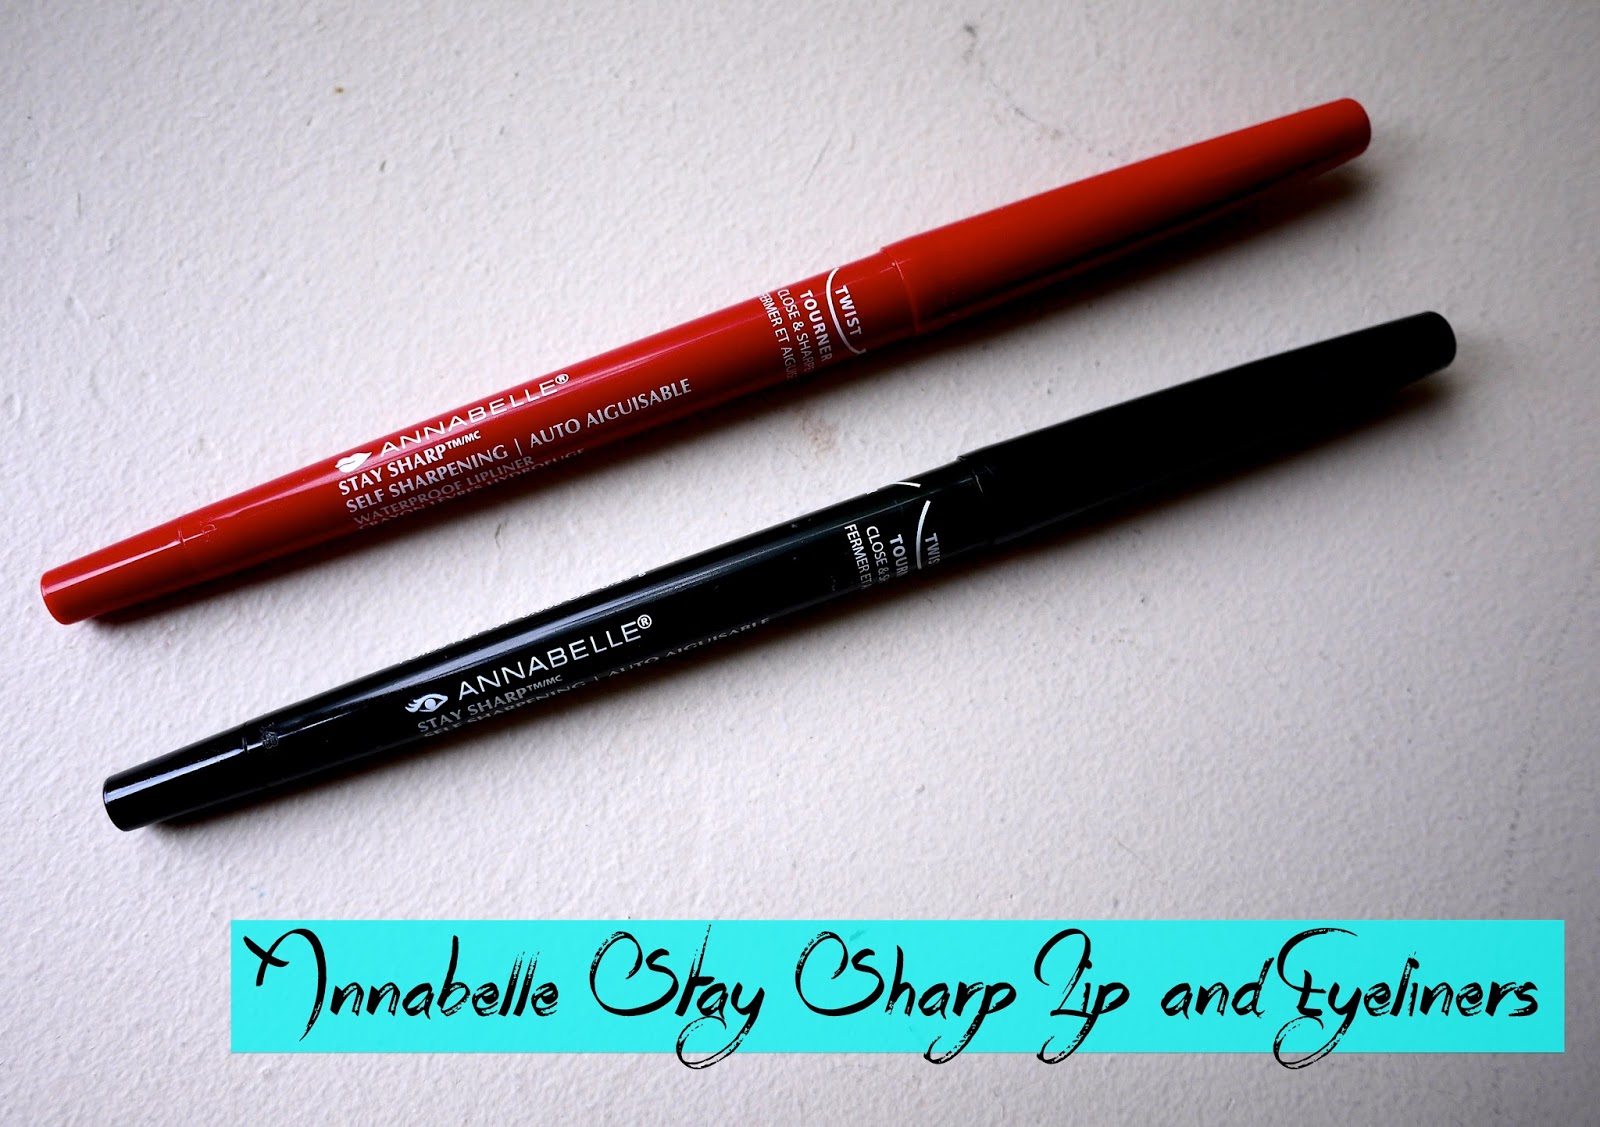 Annabelle Stay Sharp Waterproof Kohl Eyeliner and Lipliner glam red go black review swatch